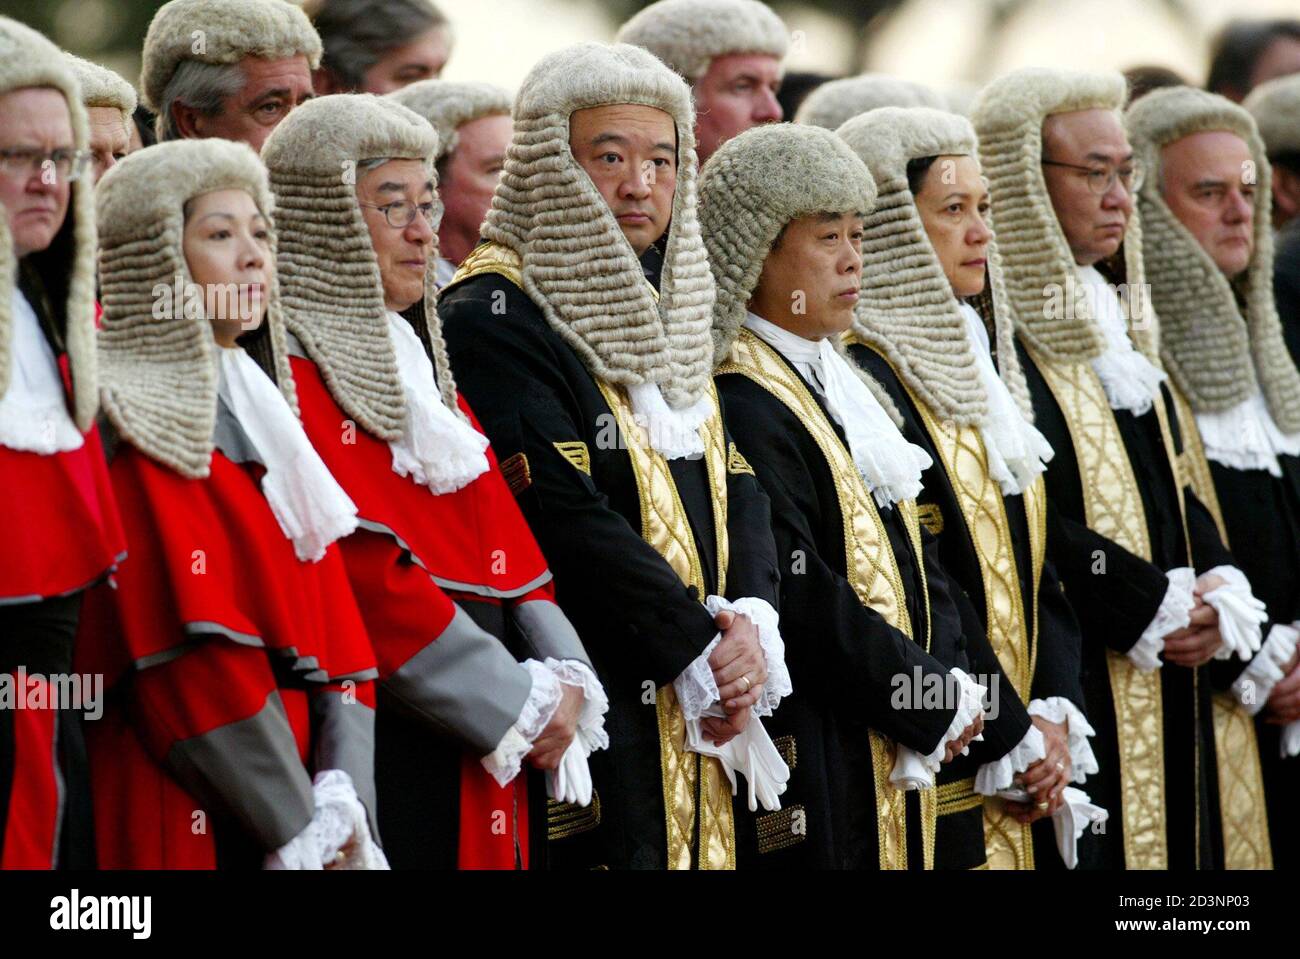 Local and expatriate supreme court judges wearing wigs attend a ceremony to  mark the beginning of the new legal year in Hong Kong January 13, 2003.  Anxiety over a planned but controversial